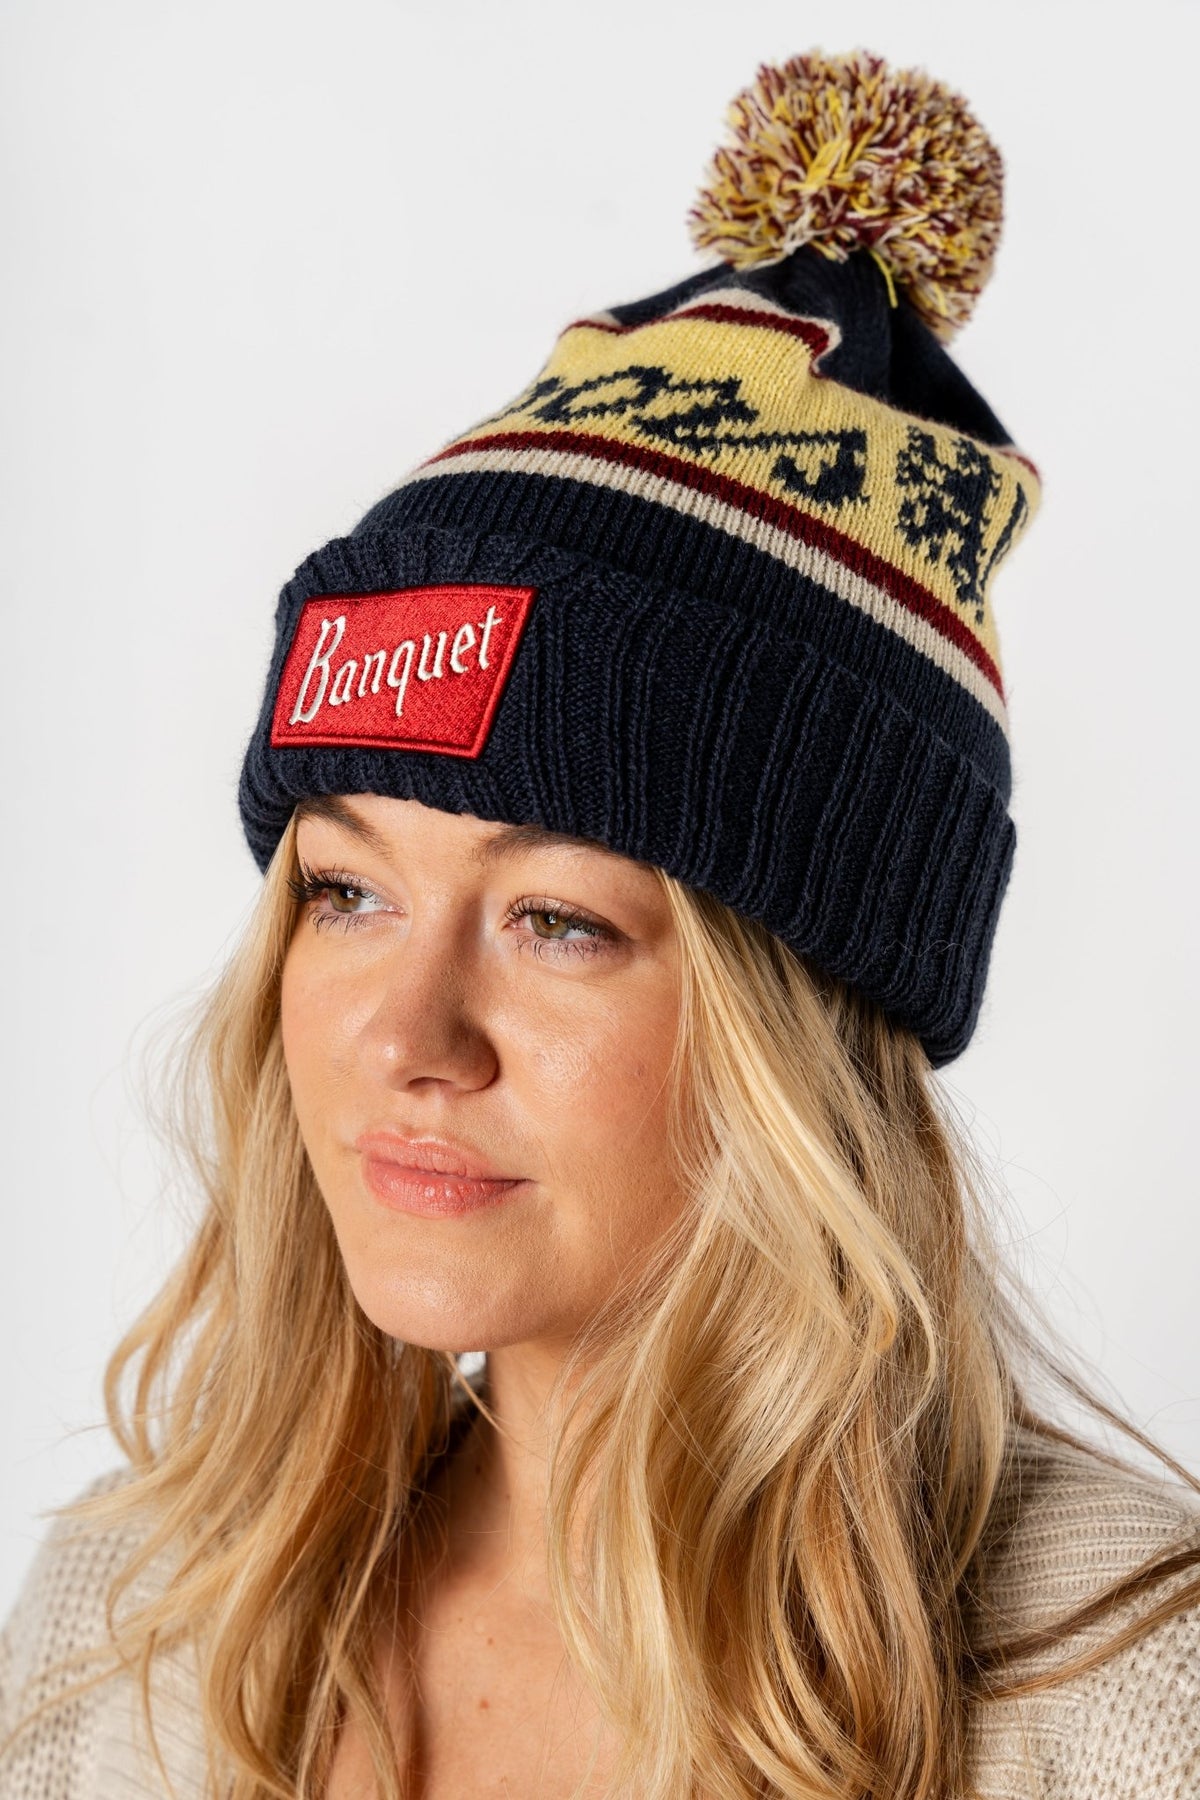 Coors pillow line pom beanie navy/red - Trendy Gifts at Lush Fashion Lounge Boutique in Oklahoma City